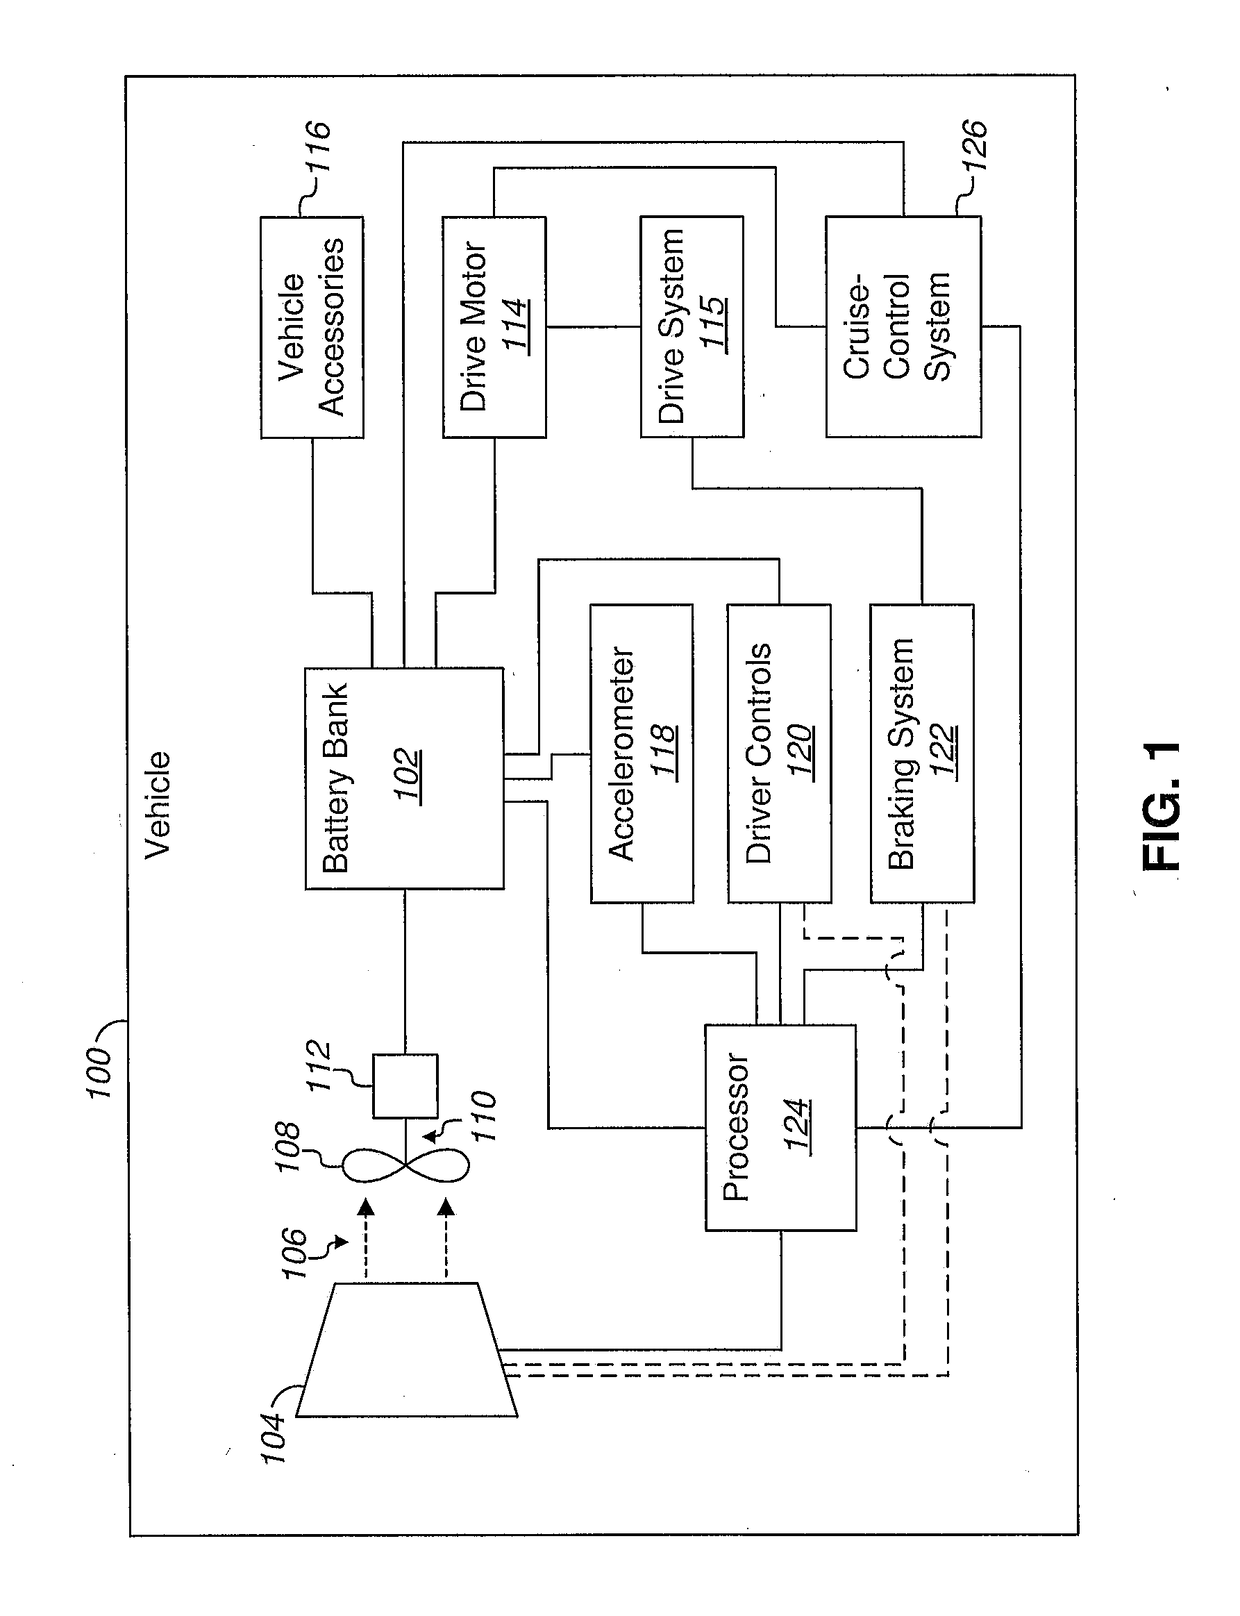 System and Method for Charging Vehicle Batteries